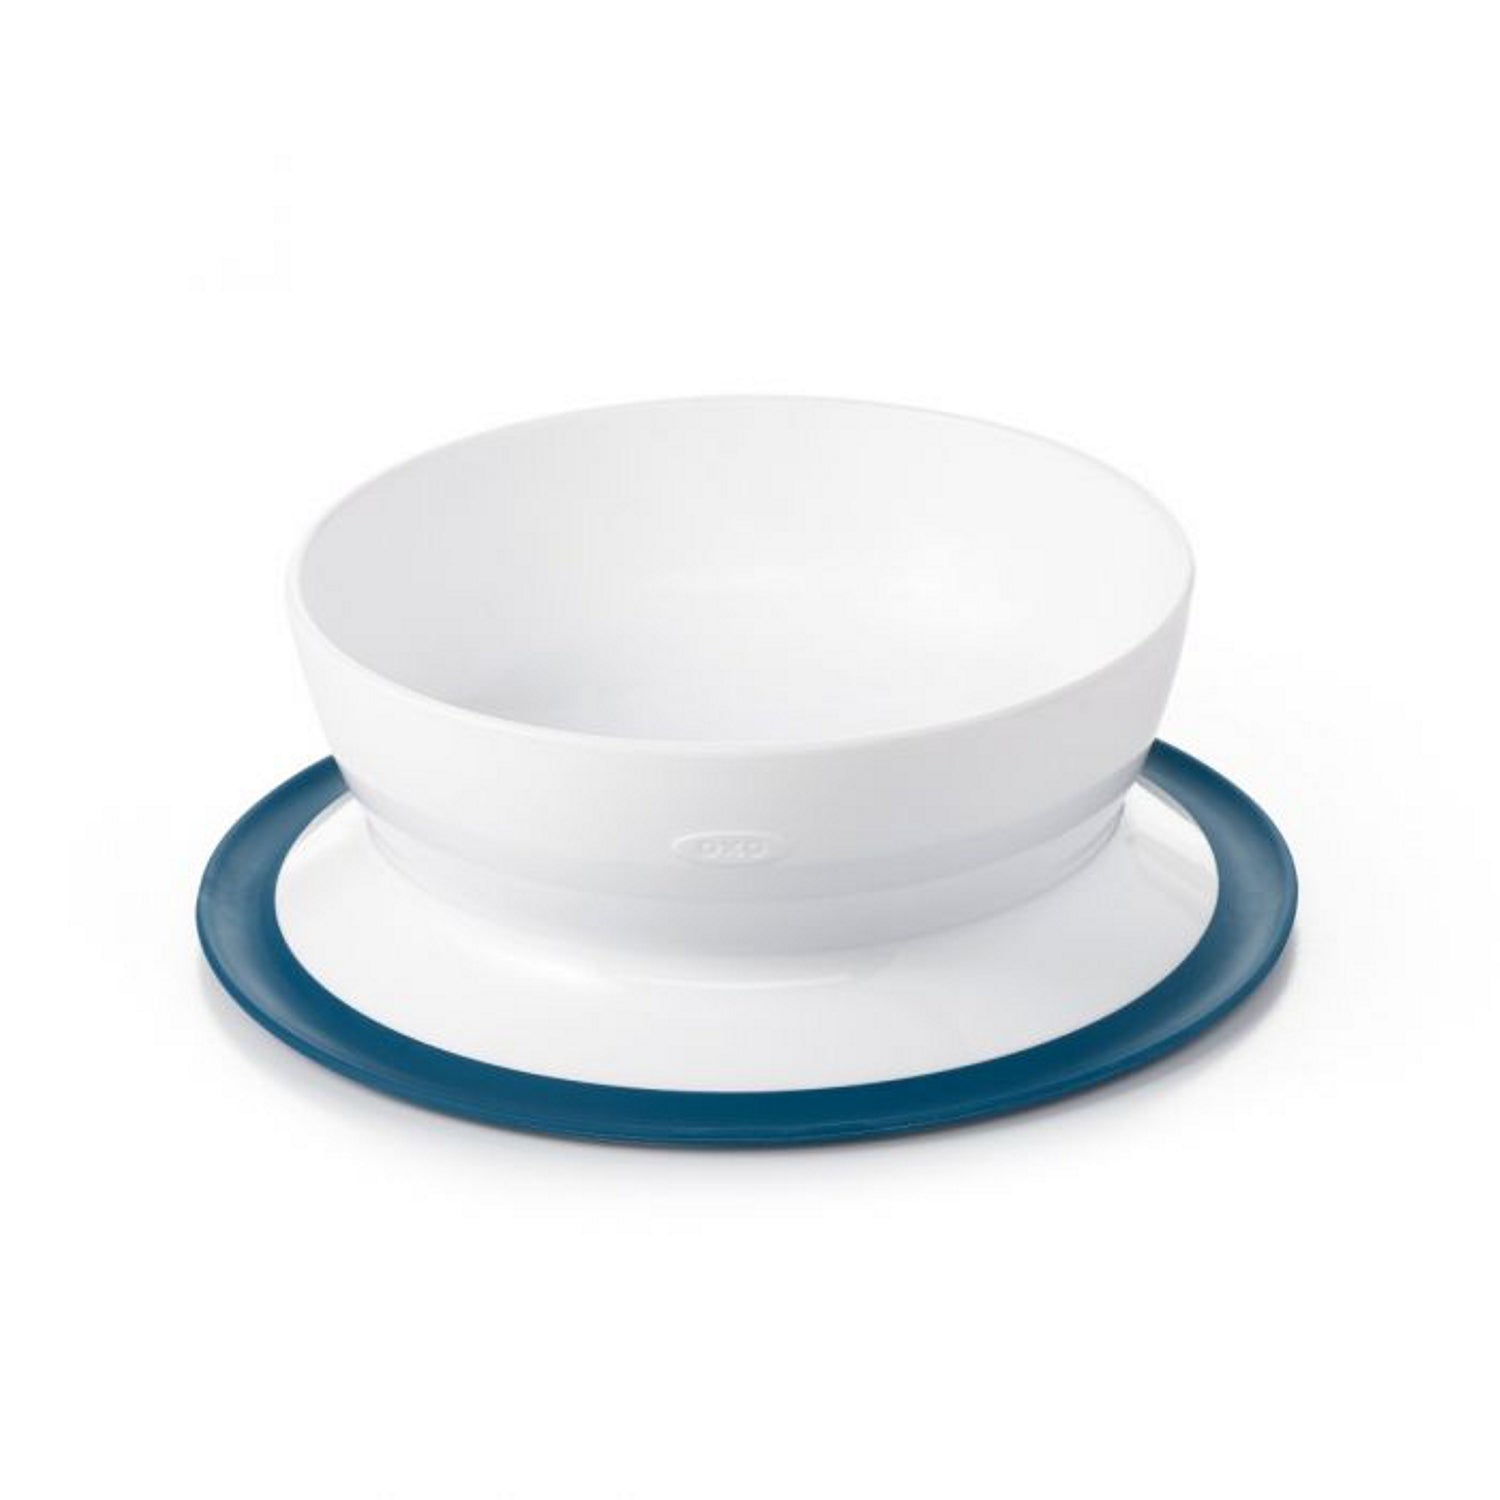 OXO Tot SUCTION BOWL